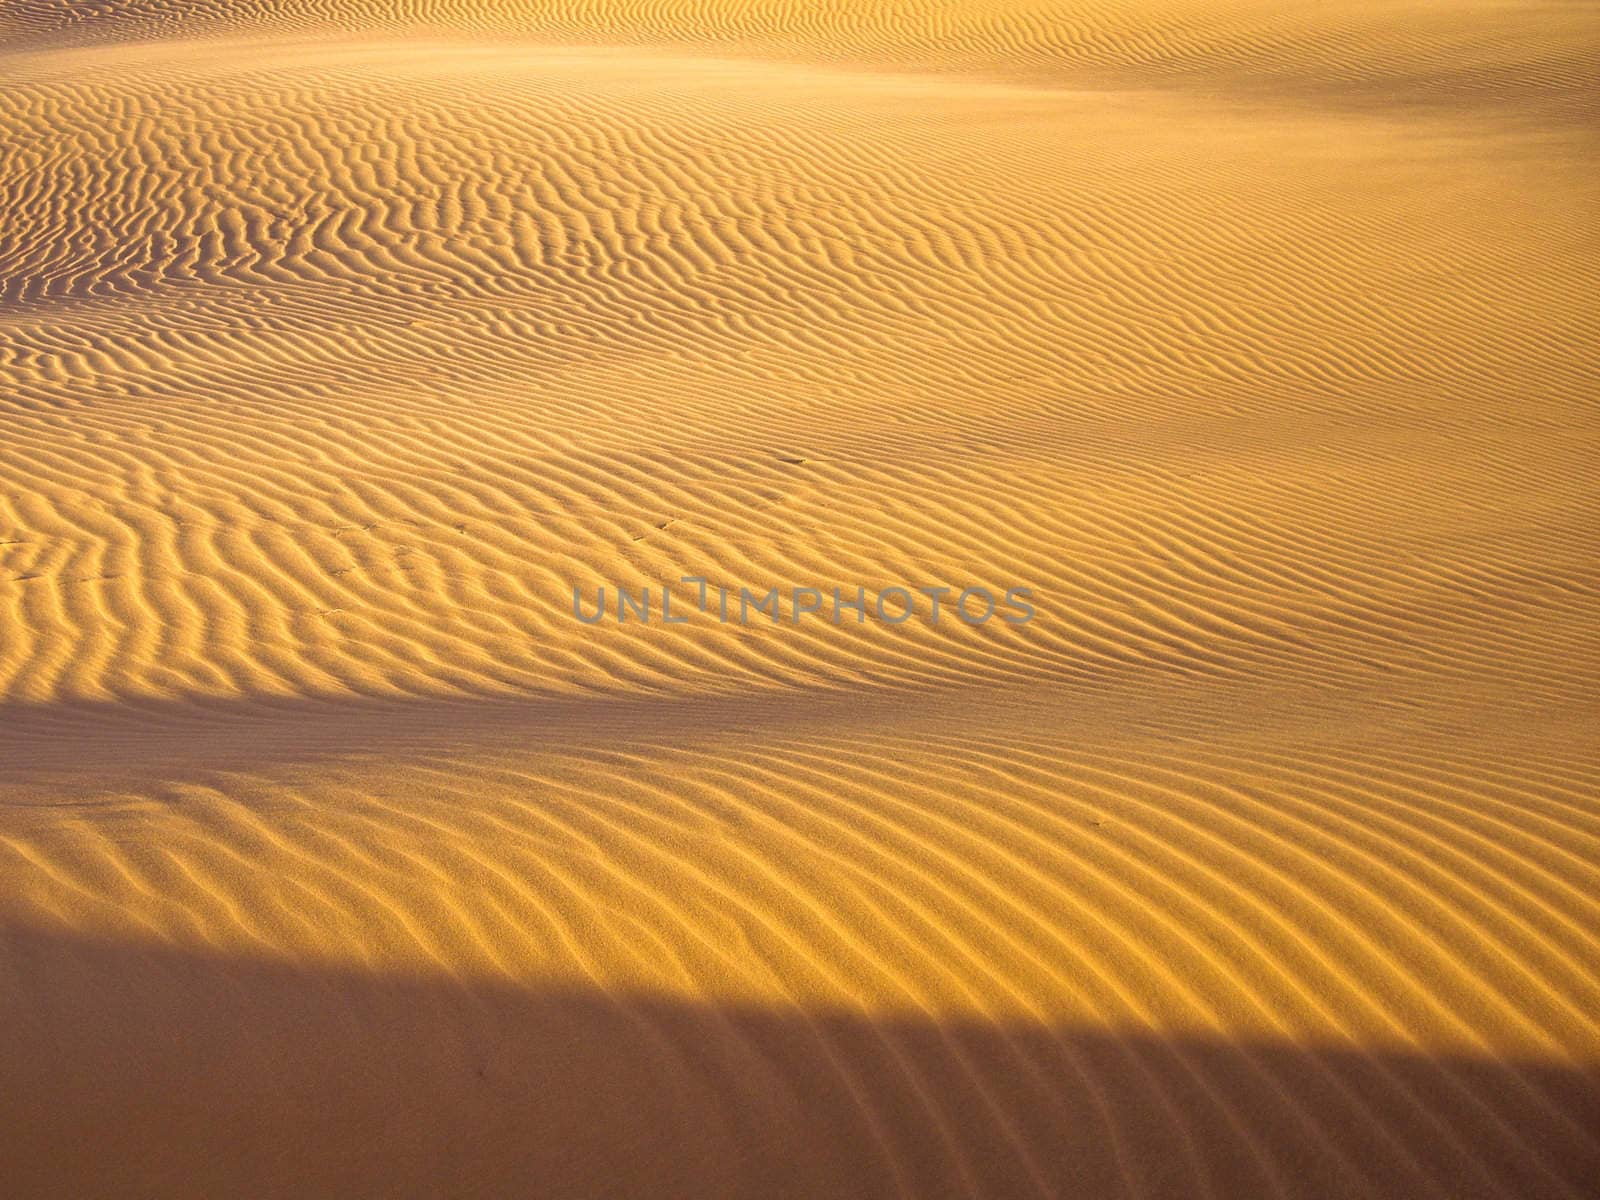 Sand patterns with light and shadow Utah USA